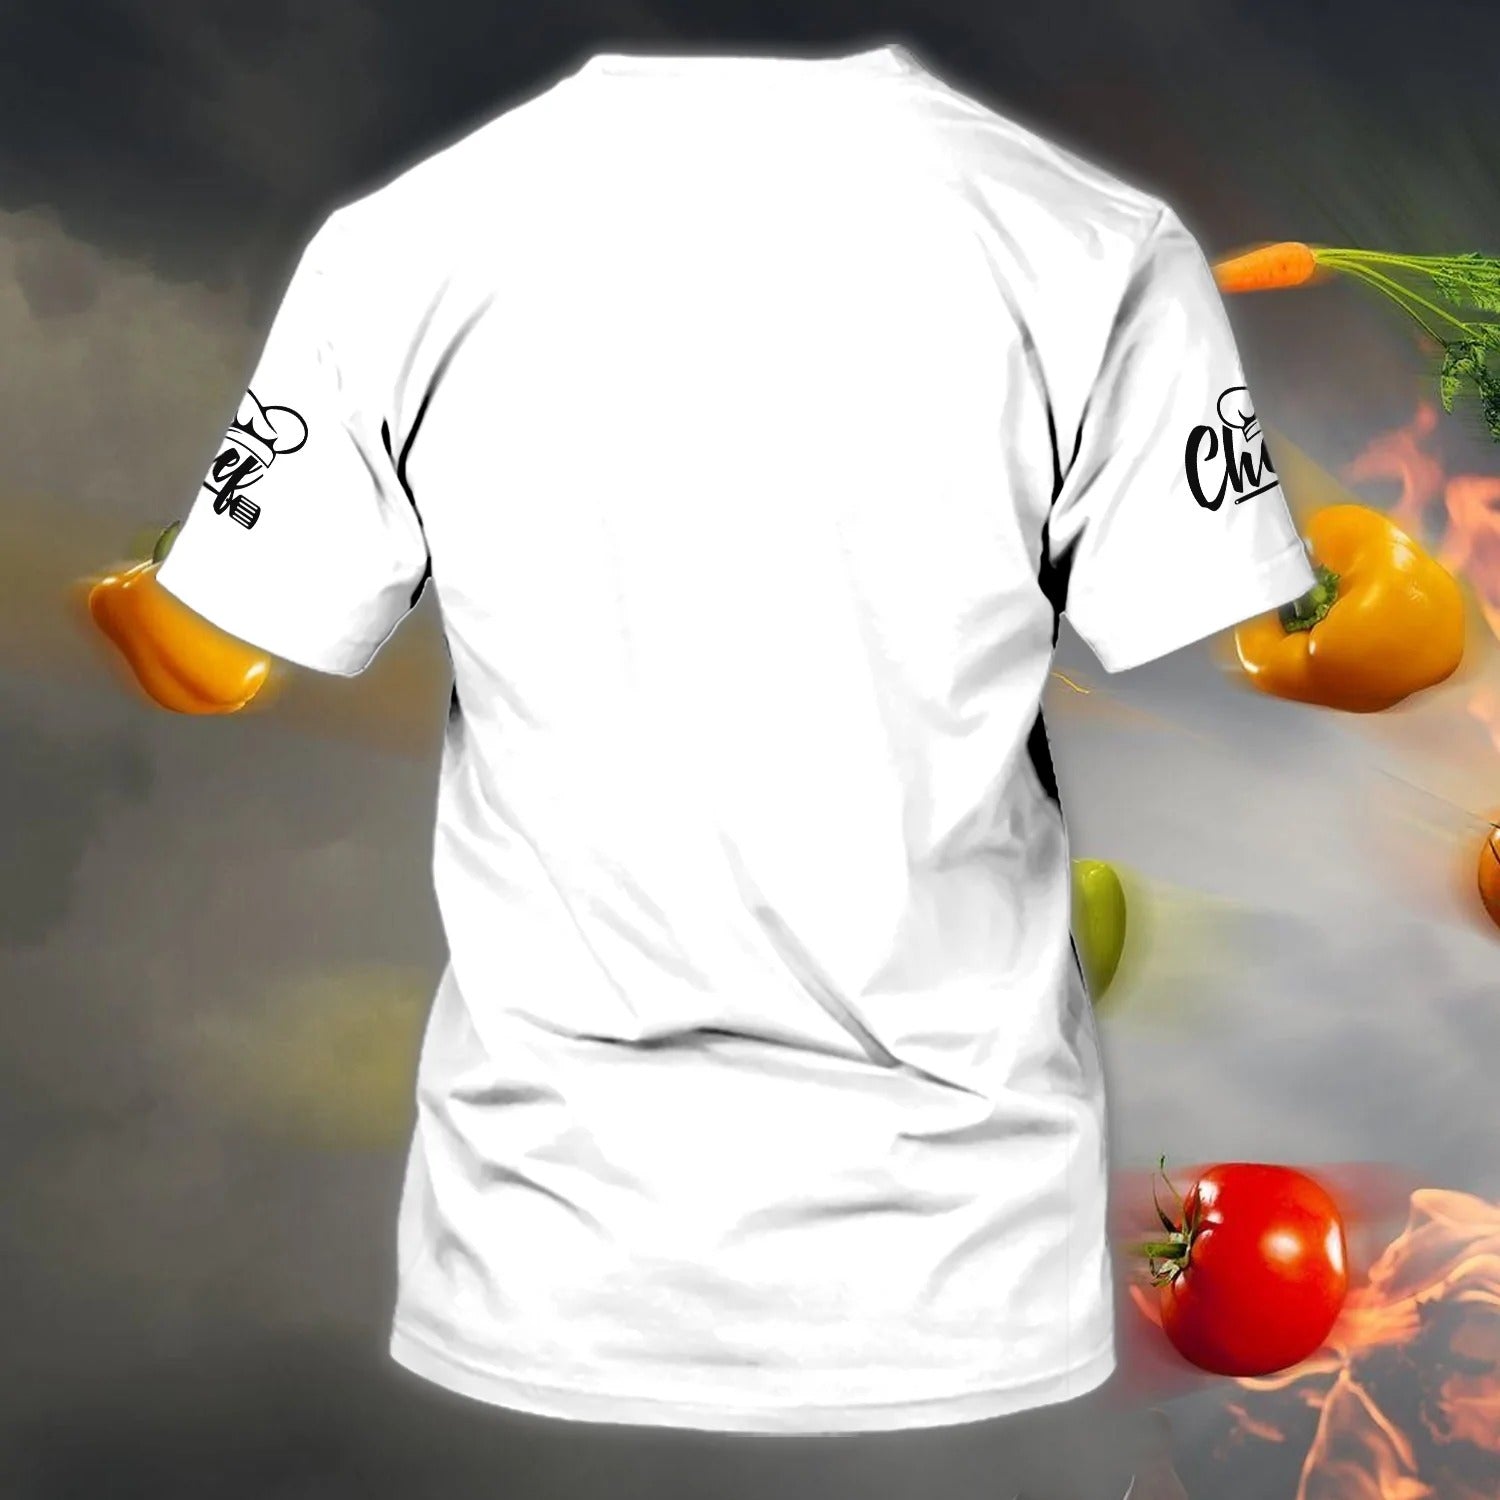 Personalized Cool Shirt For Master Chef/ Chef Shirts Men Women/ Present To Chef Friend/ Dad Chef Shirt